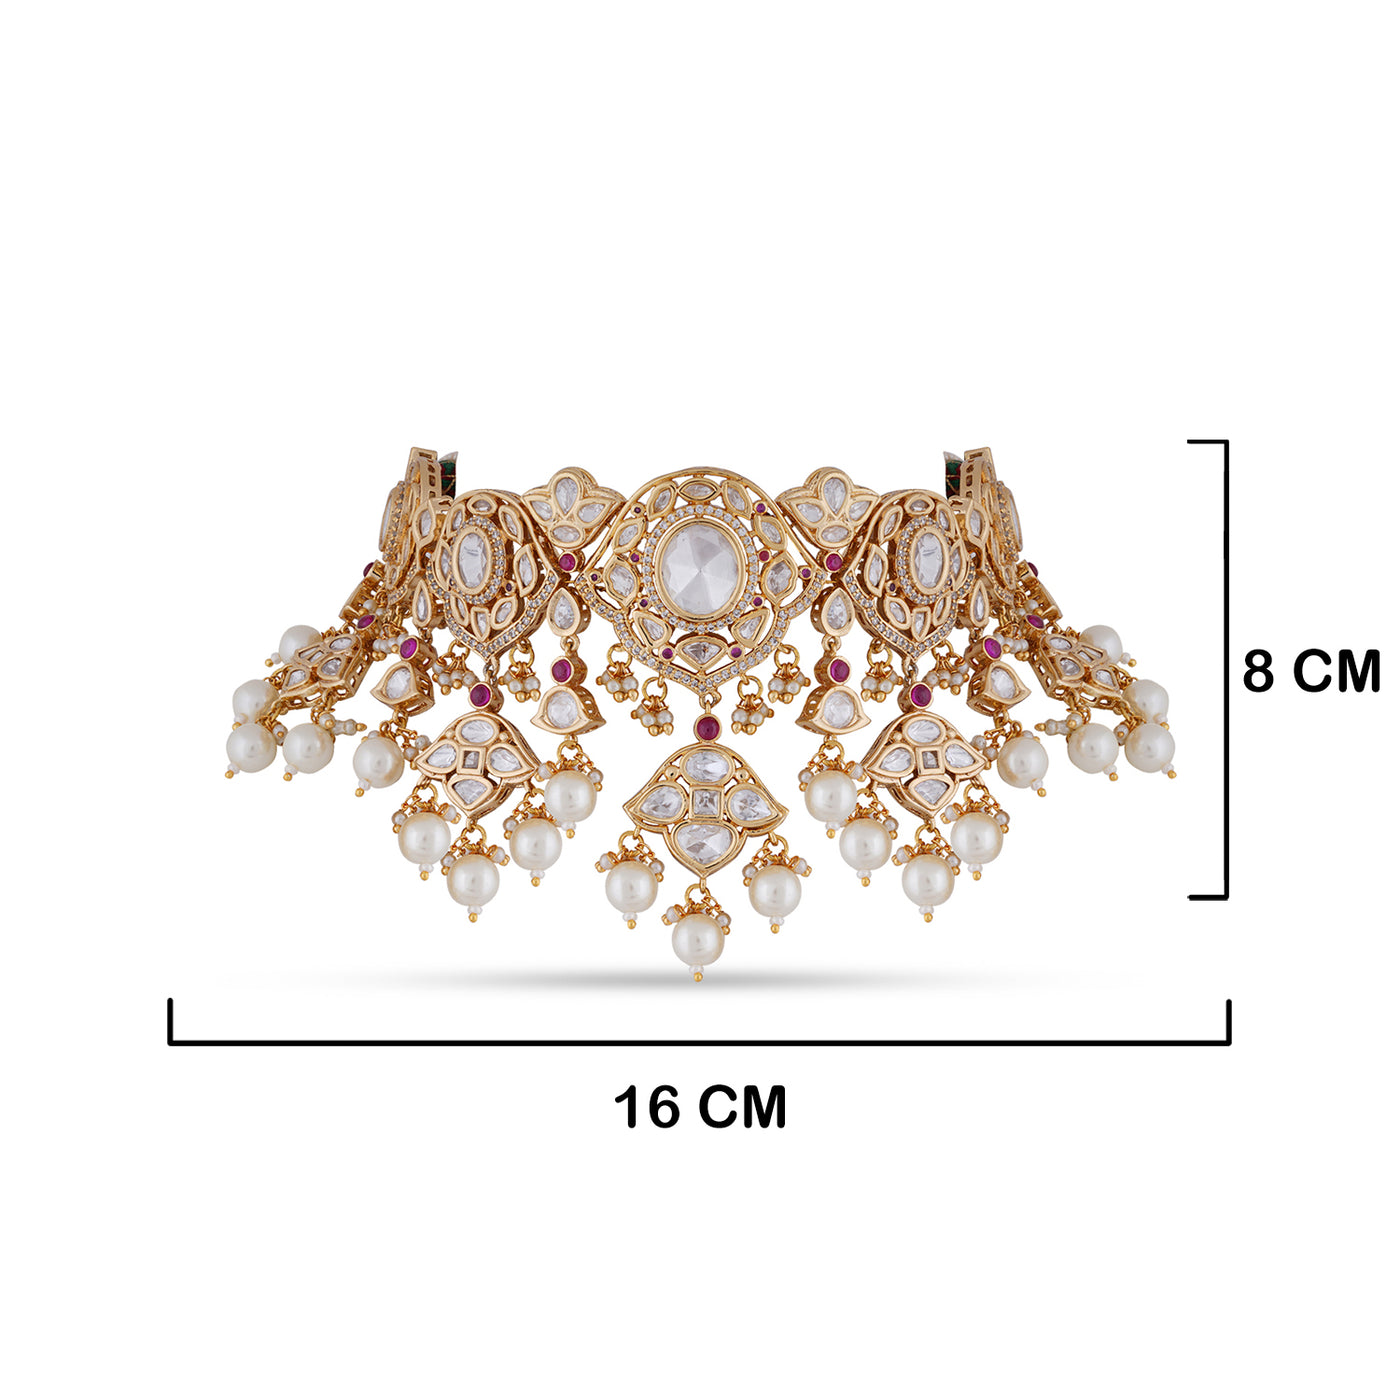 Pearled Kundan Choker with measurements in cm. 8cm by 16cm.